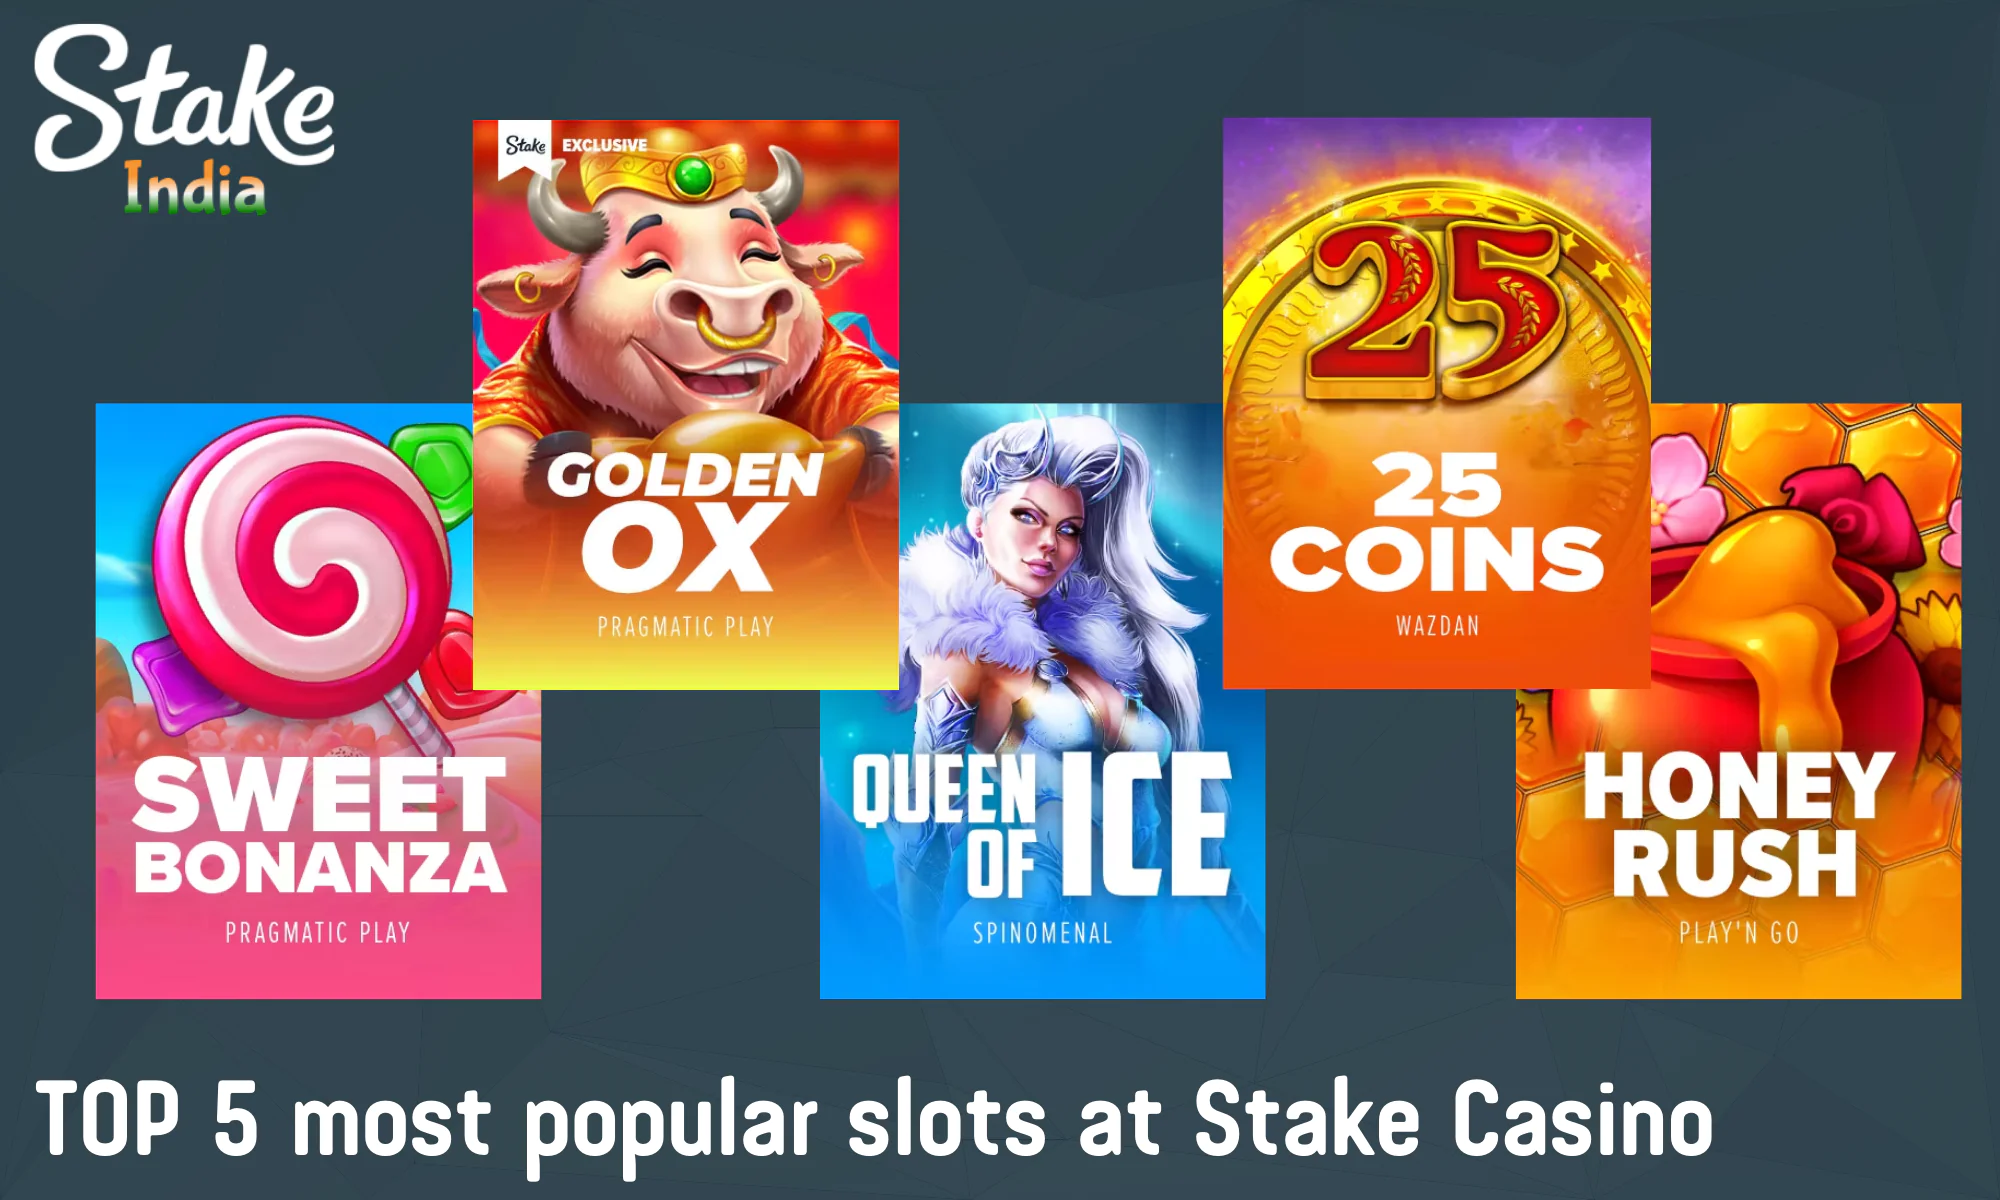 Here are the top 5 most popular games in the slots category at Stake